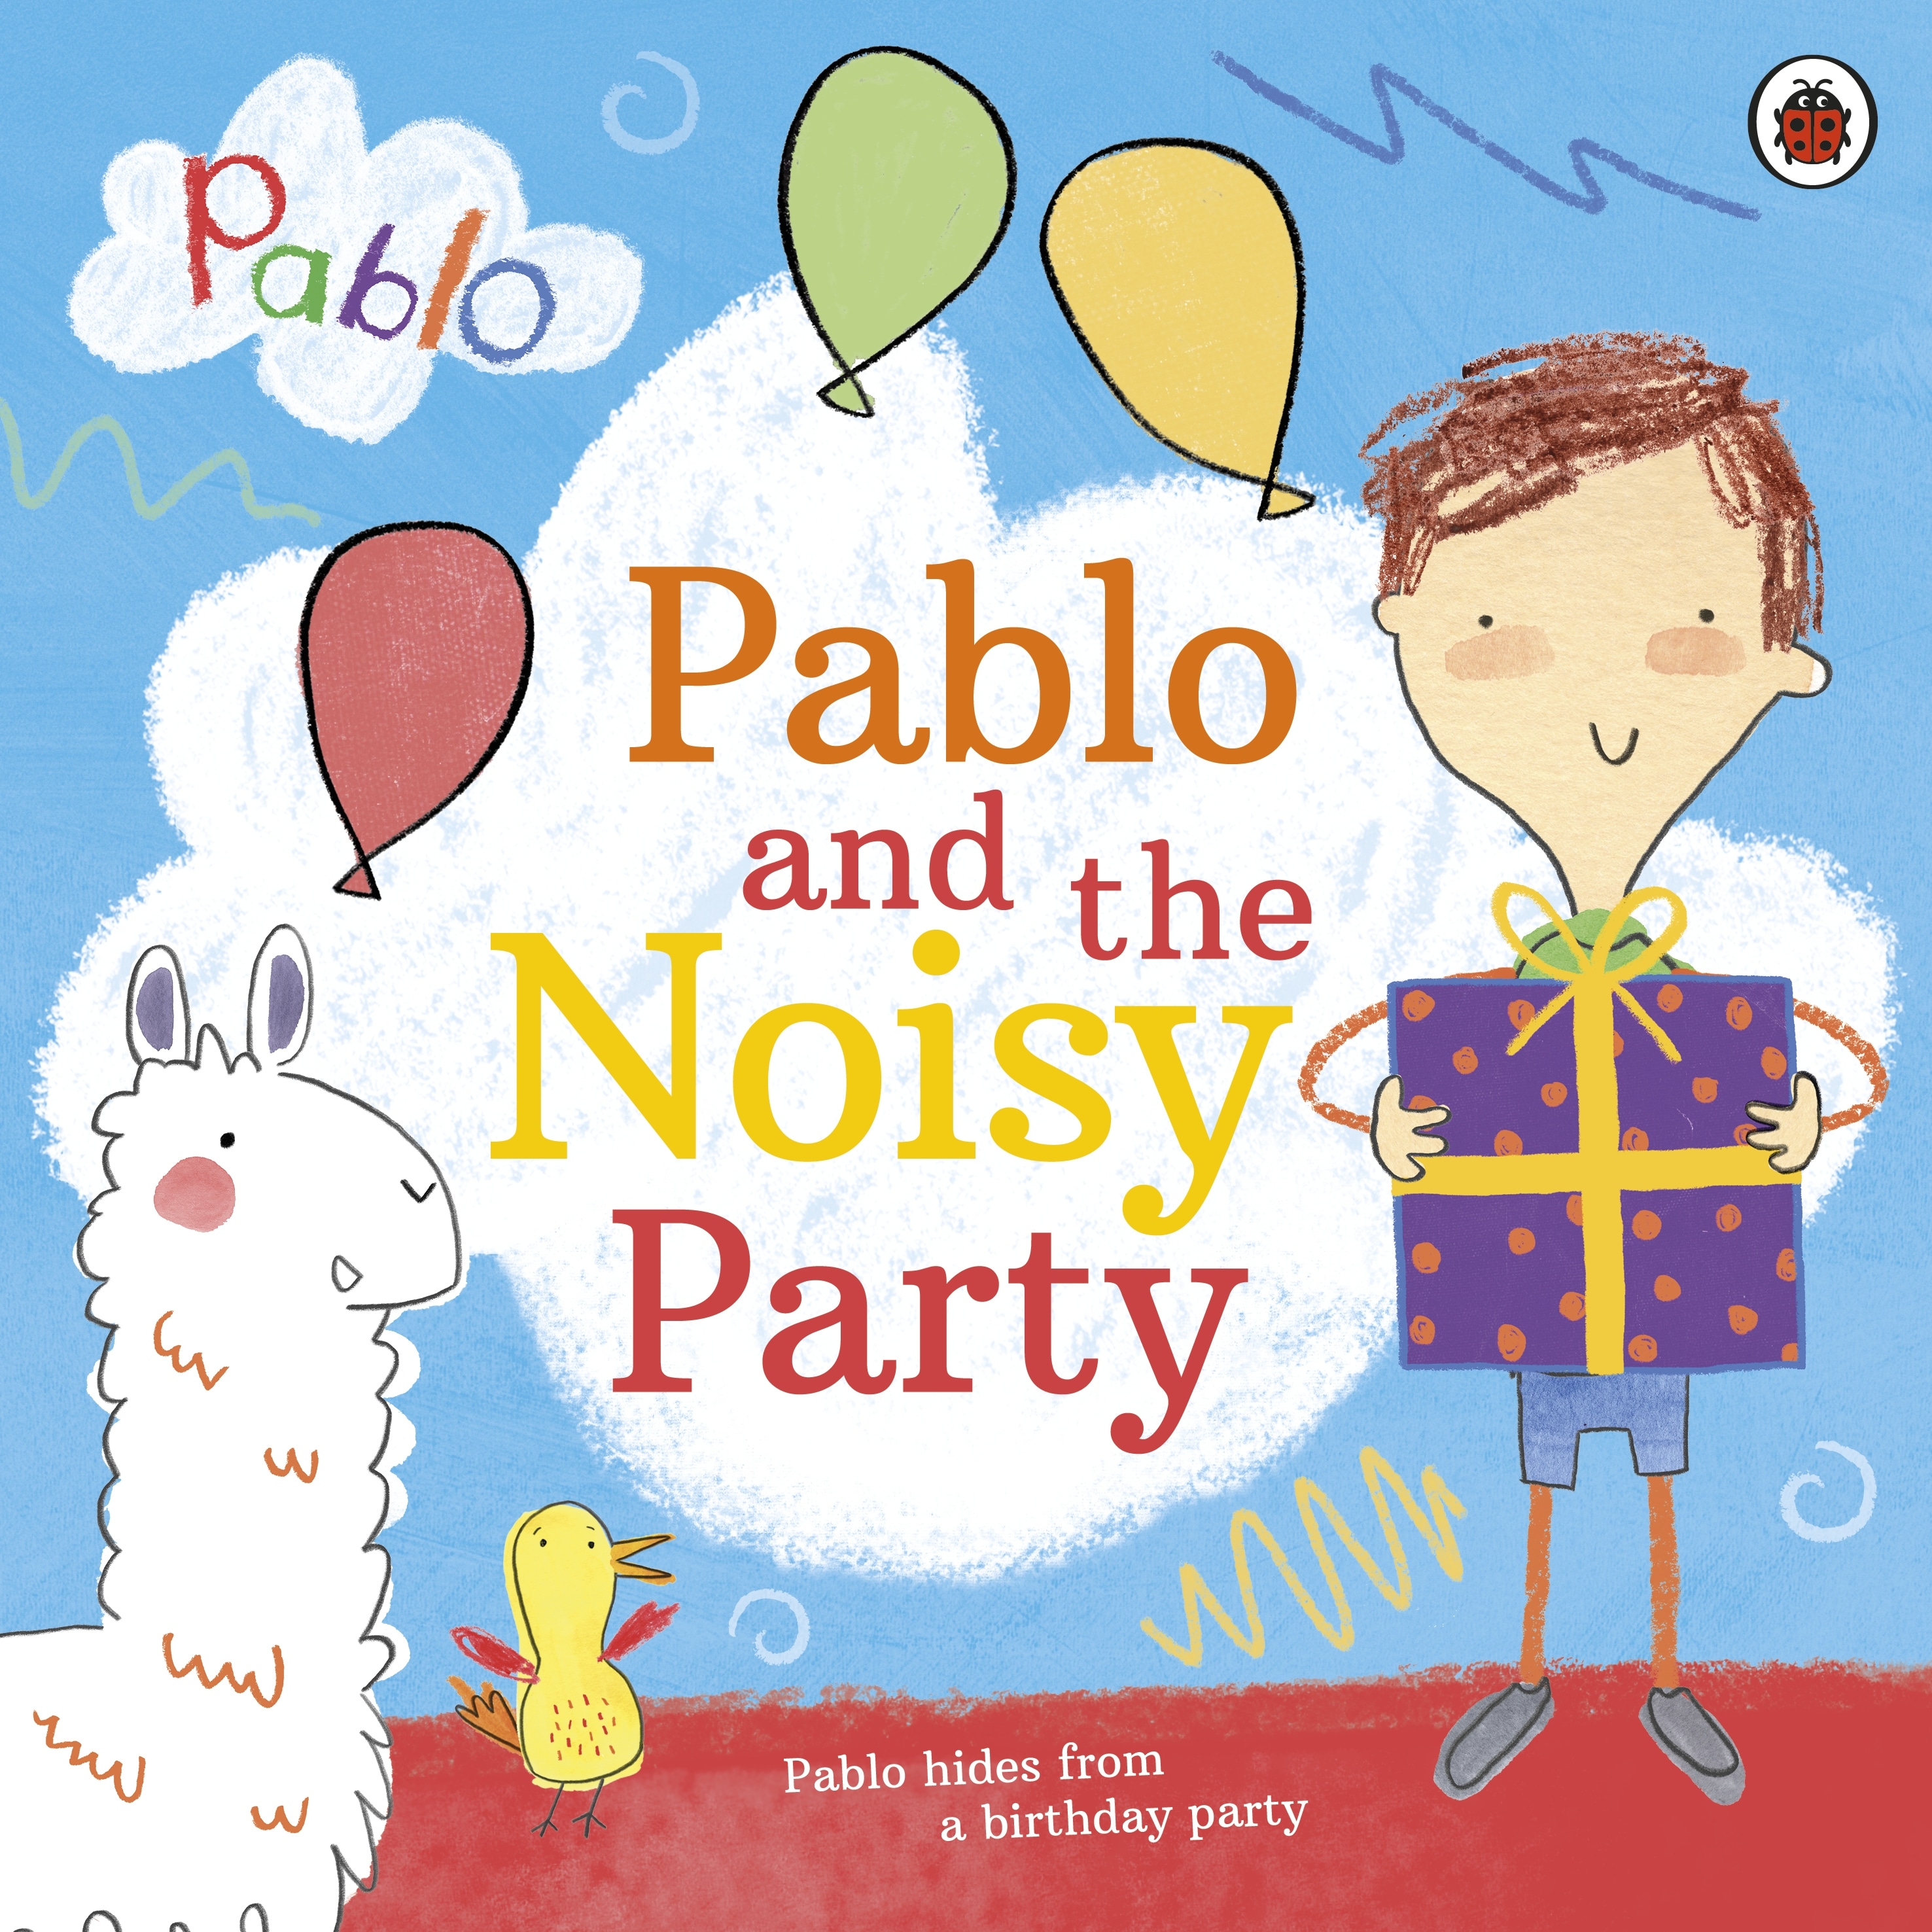 Book “Pablo: Pablo and the Noisy Party” by Pablo — March 19, 2020